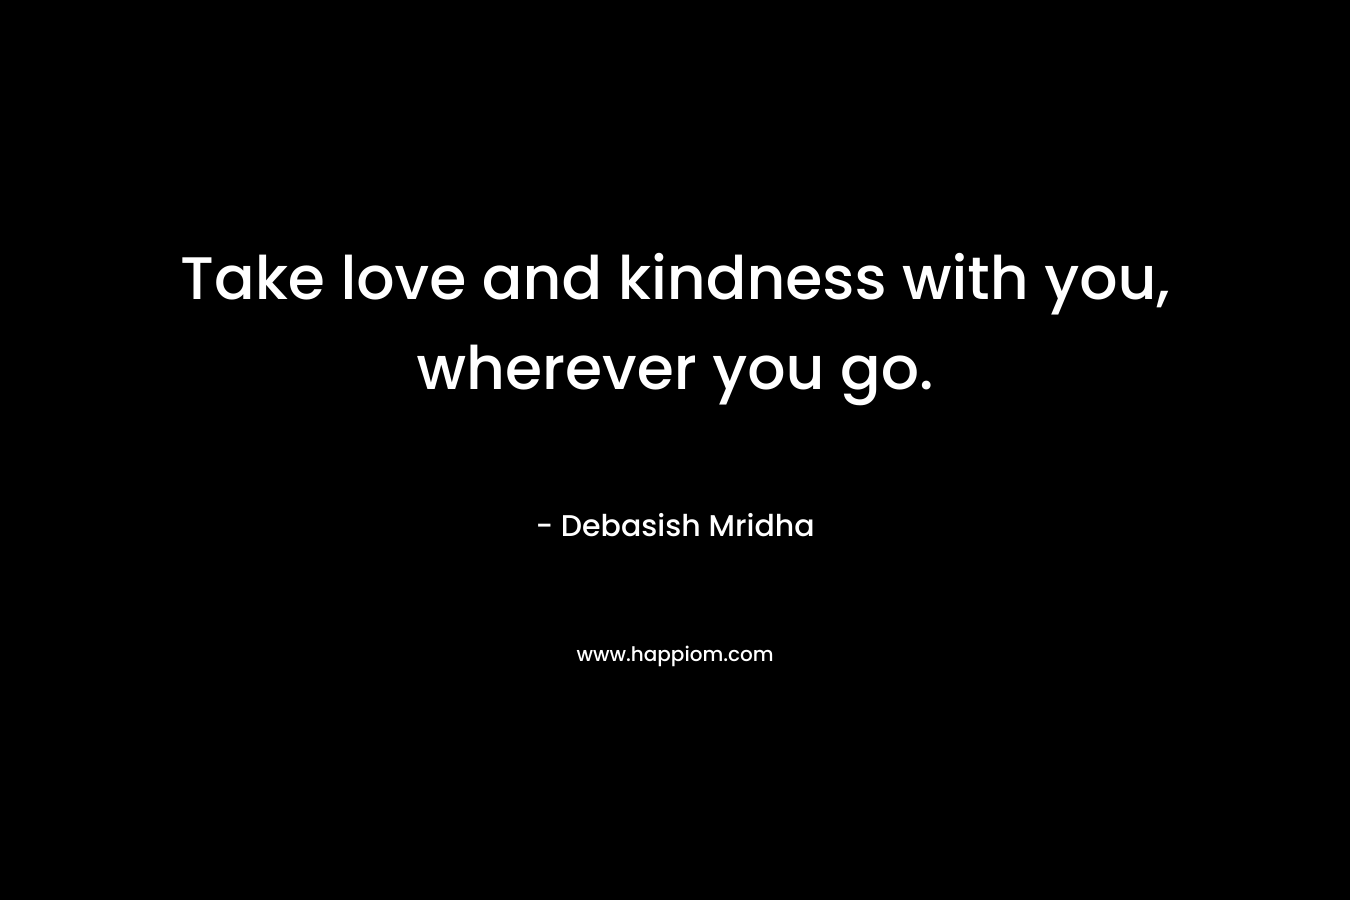 Take love and kindness with you, wherever you go.